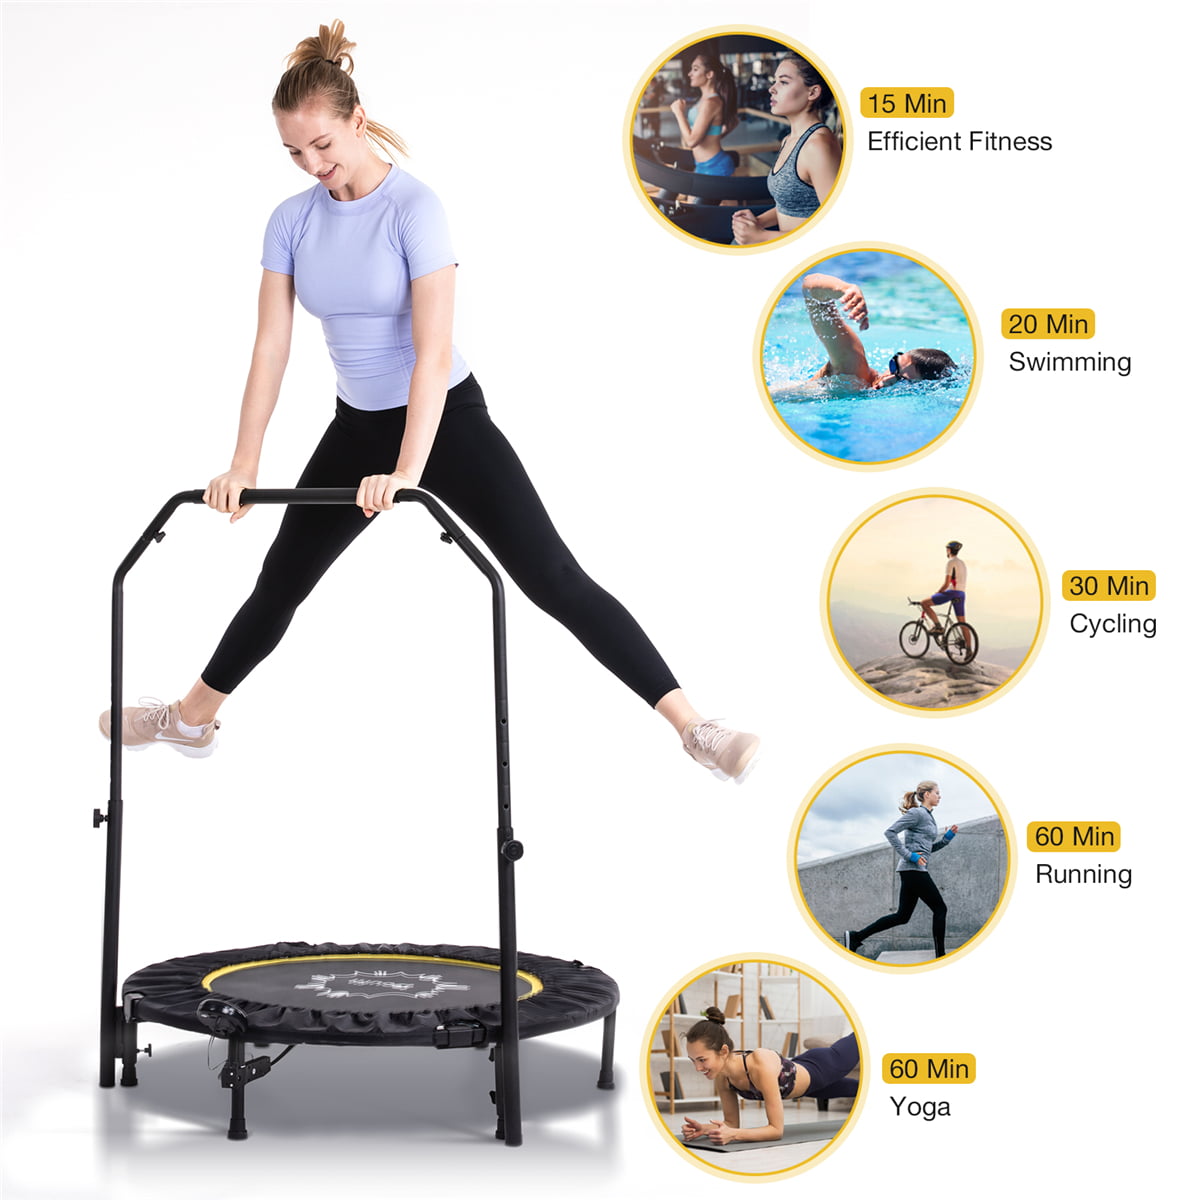 Giantex Folding Mini Trampoline, Portable Recreational Fitness Trampoline  for Adults, Kids, Max Load 330lbs, Foldable Indoor Exercise Rebounder